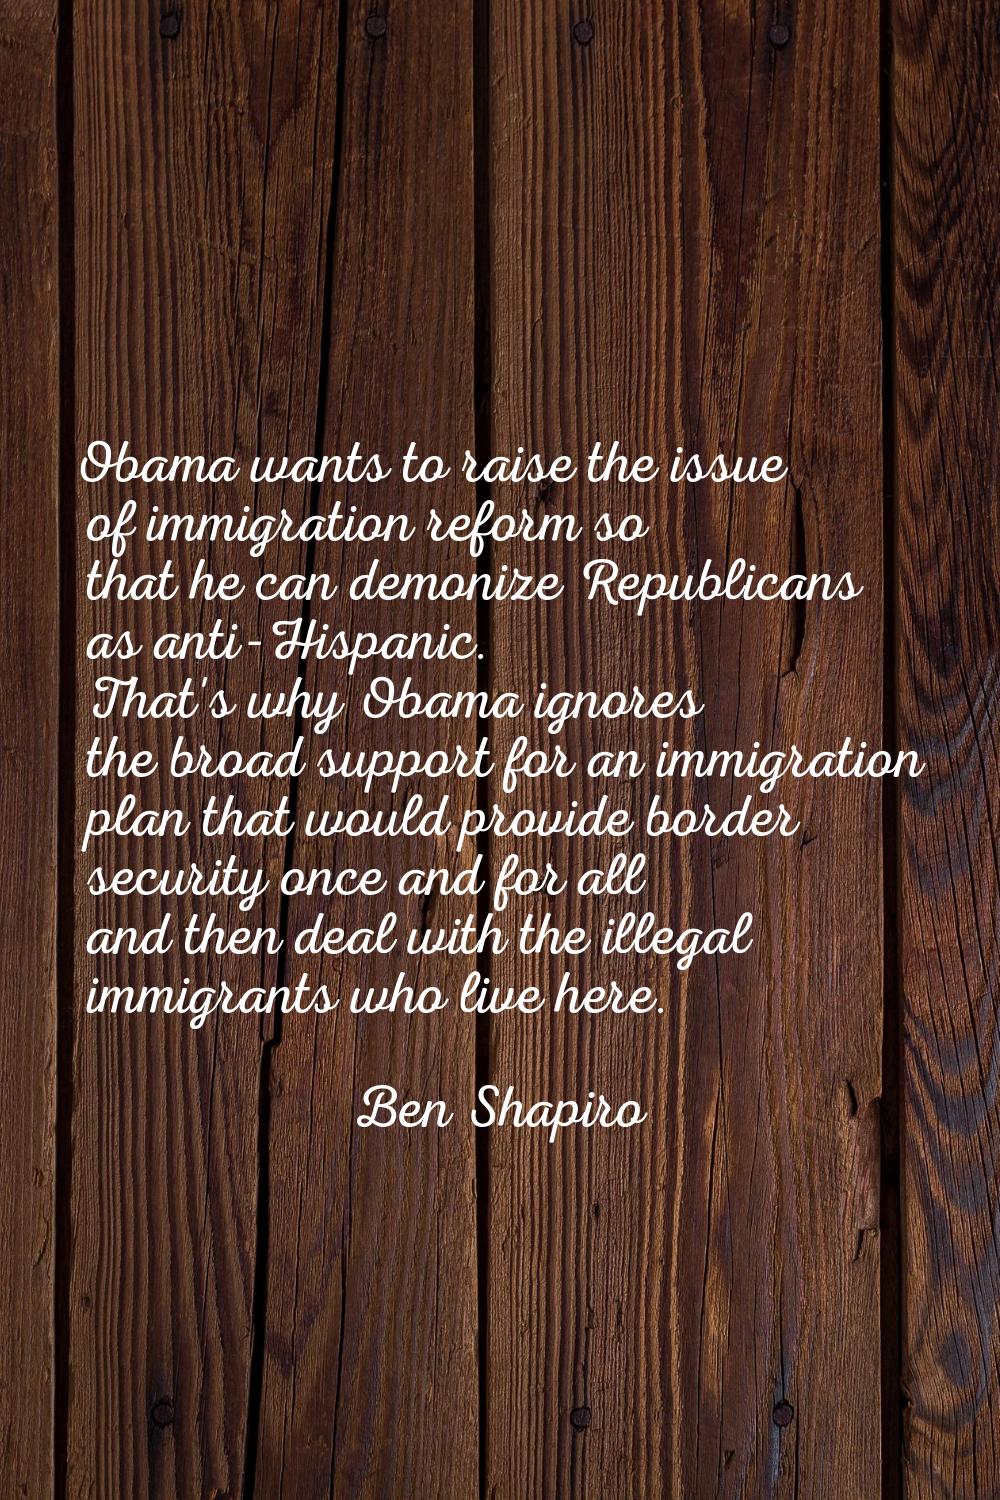 Obama wants to raise the issue of immigration reform so that he can demonize Republicans as anti-Hi